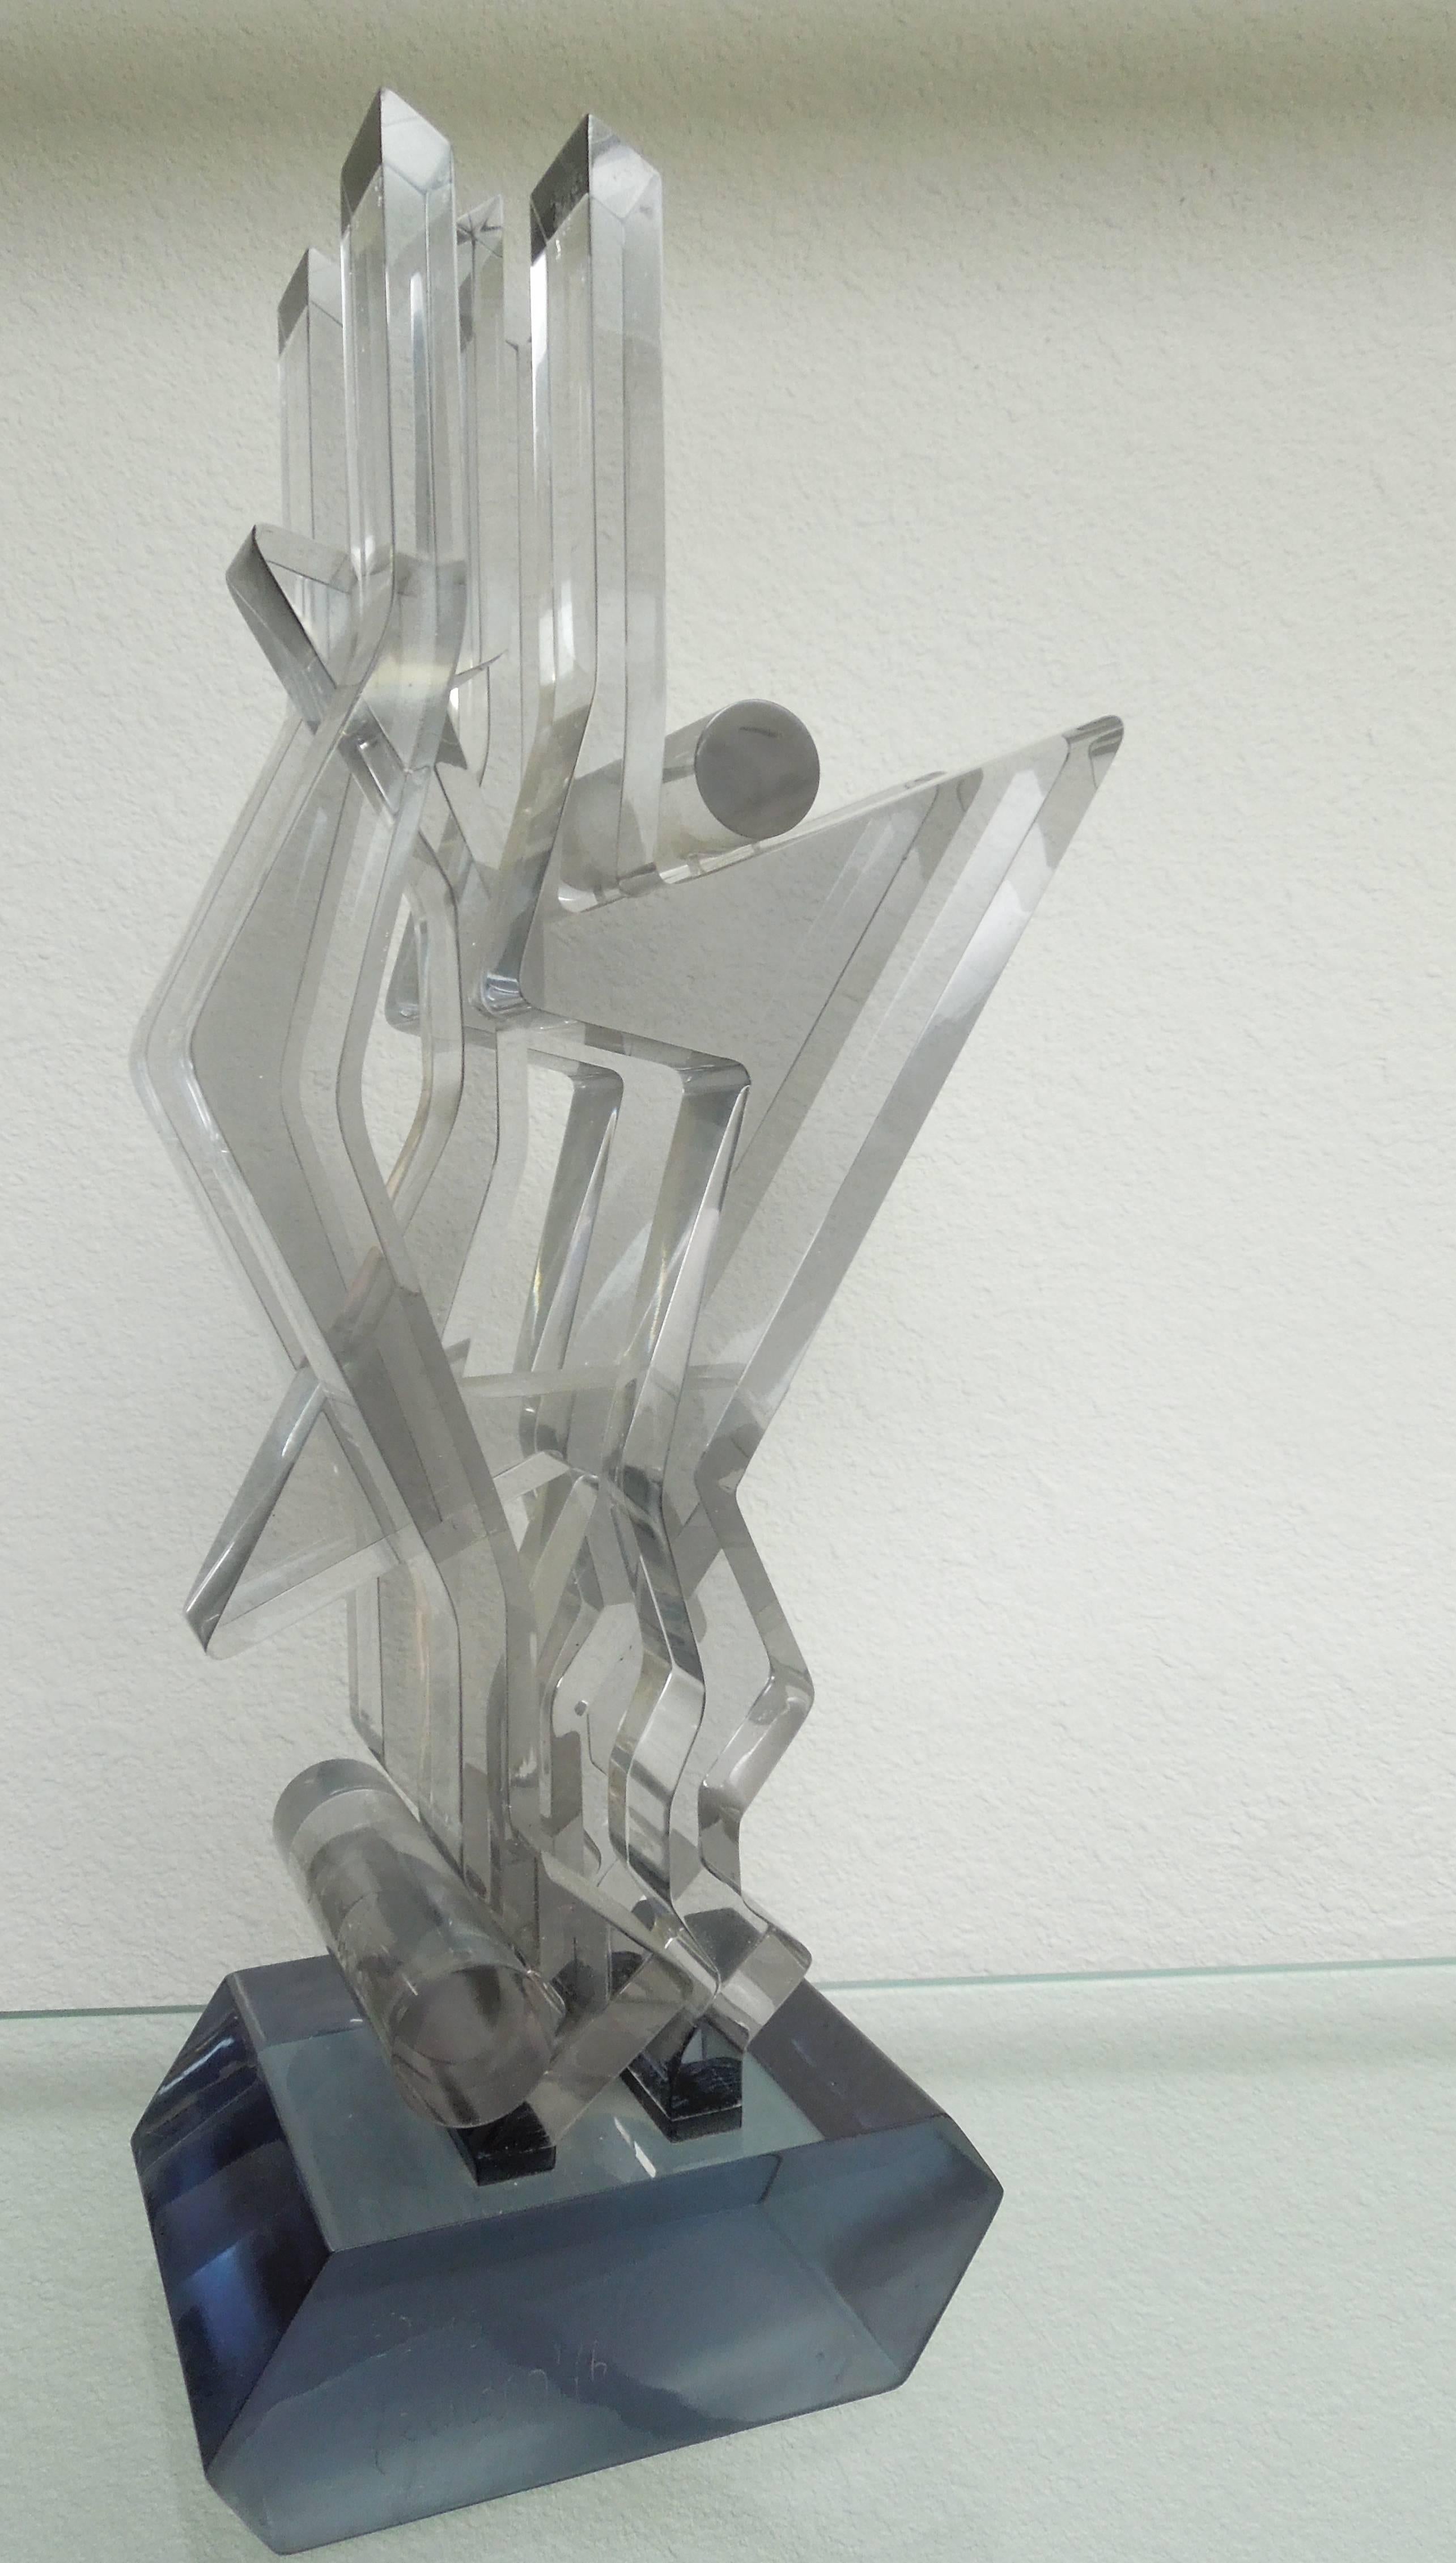 From a prominent Palm Springs Art Collector's estate is a platinum and charcoal colored Lucite sculpture by Italian Modernist Artist Giorgio Zennaro (Venezia, 10 ottobre 1926, Venezia, 13 agosto 2005) Signed/dated/numbered. 1976. #39/75. Very multi